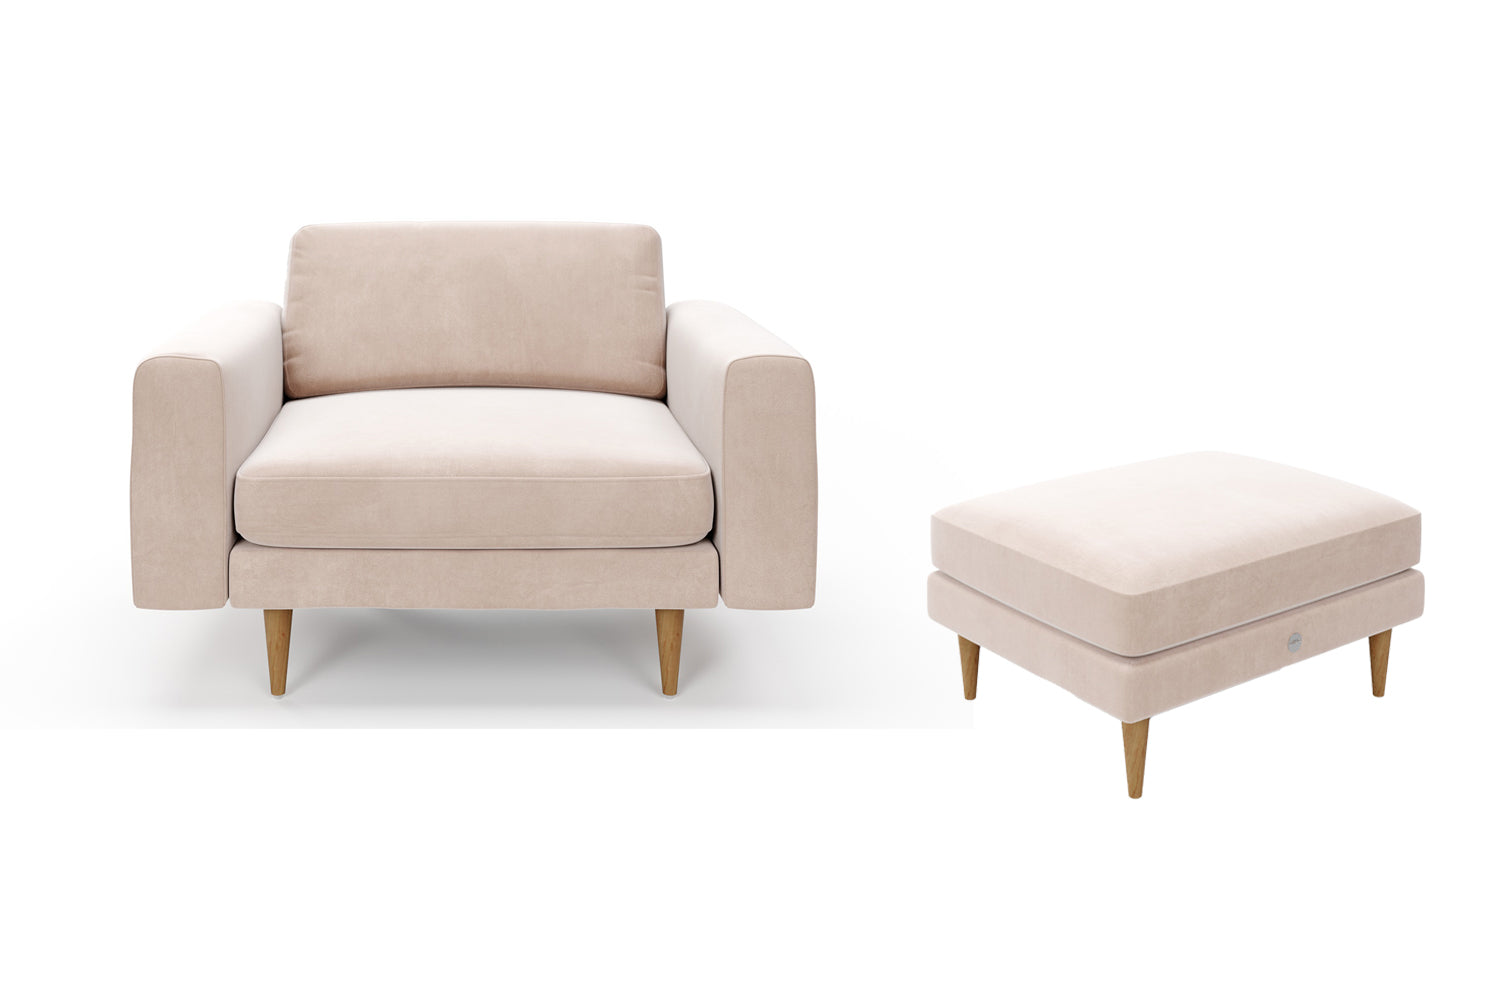 The Big Chill - 1.5 Seater Snuggler and Footstool Set - Taupe